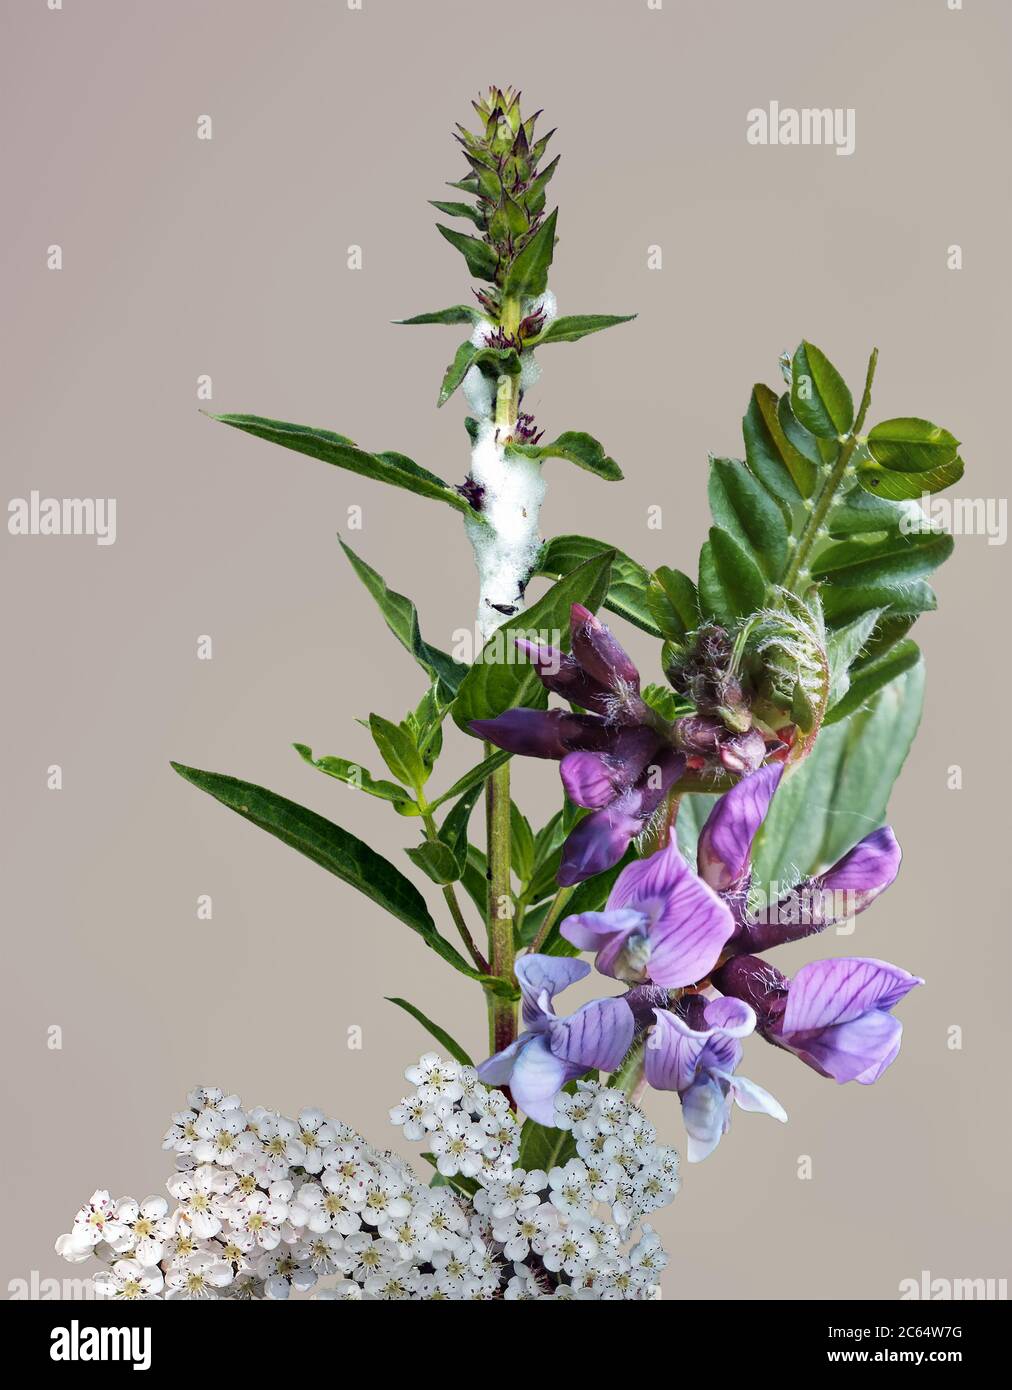 Image of a bunch of wild flowers on a uniform background. Stock Photo